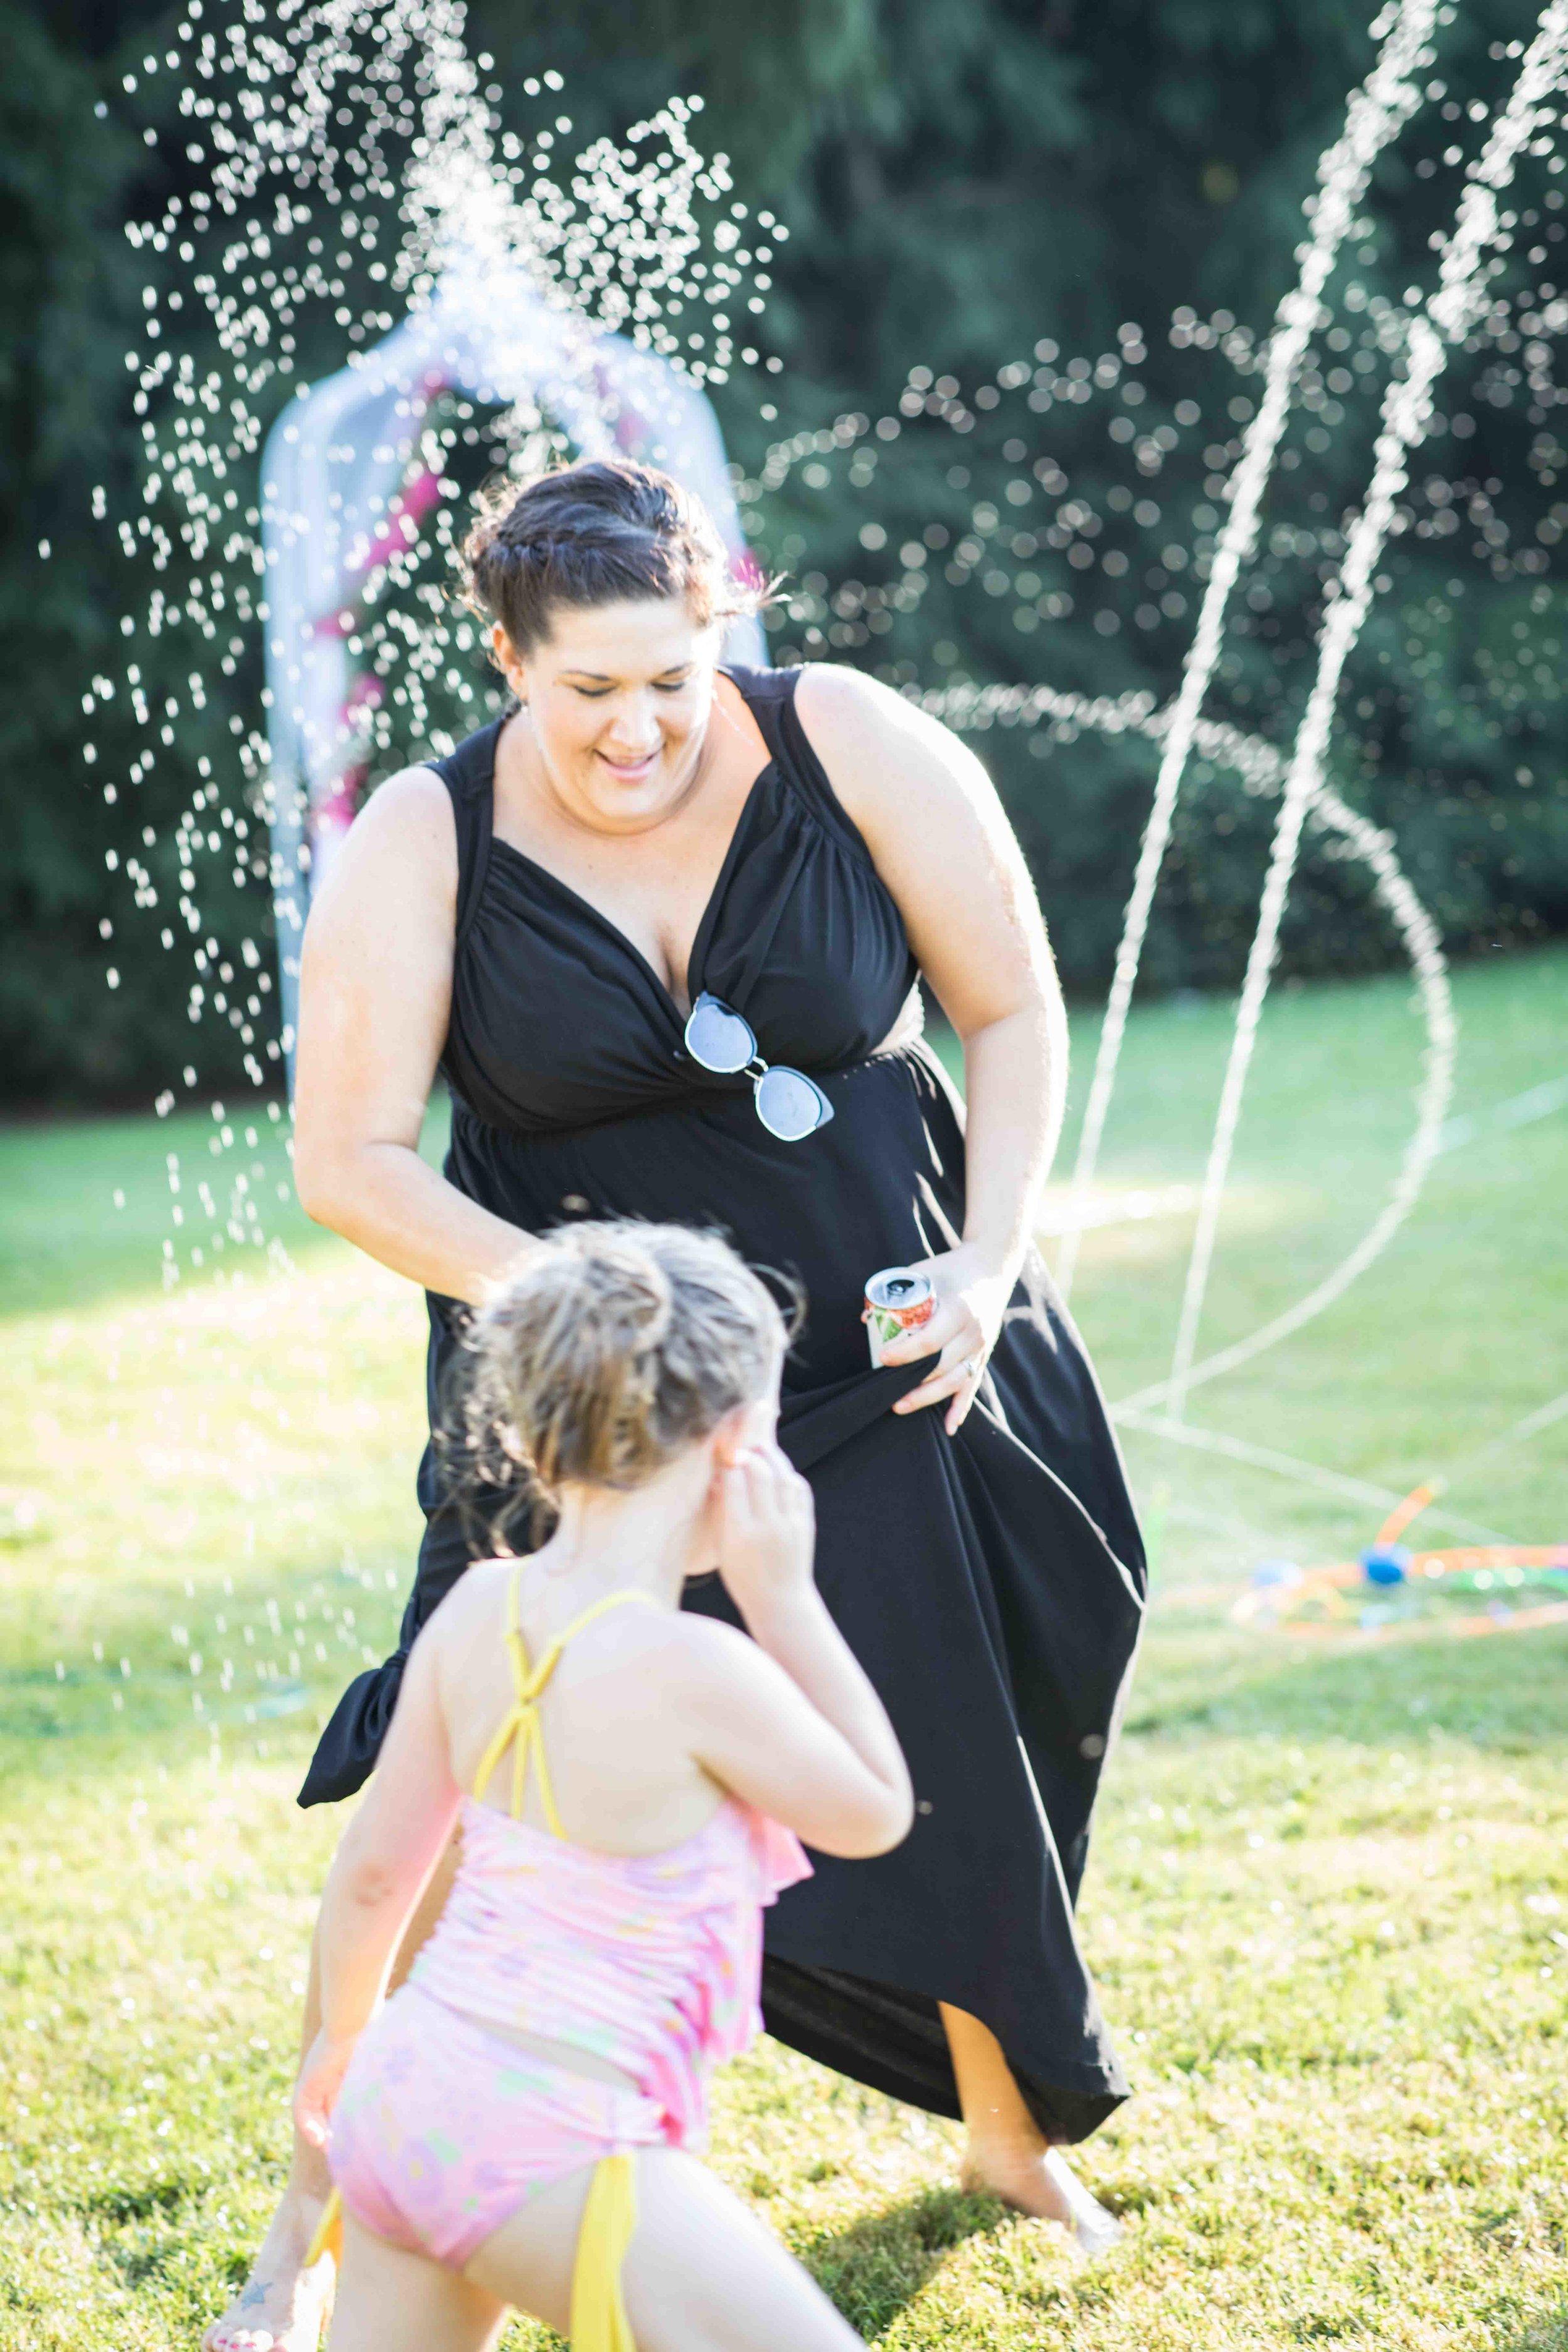  a bridesmaid gets soaked dancing with a little girl in the water 